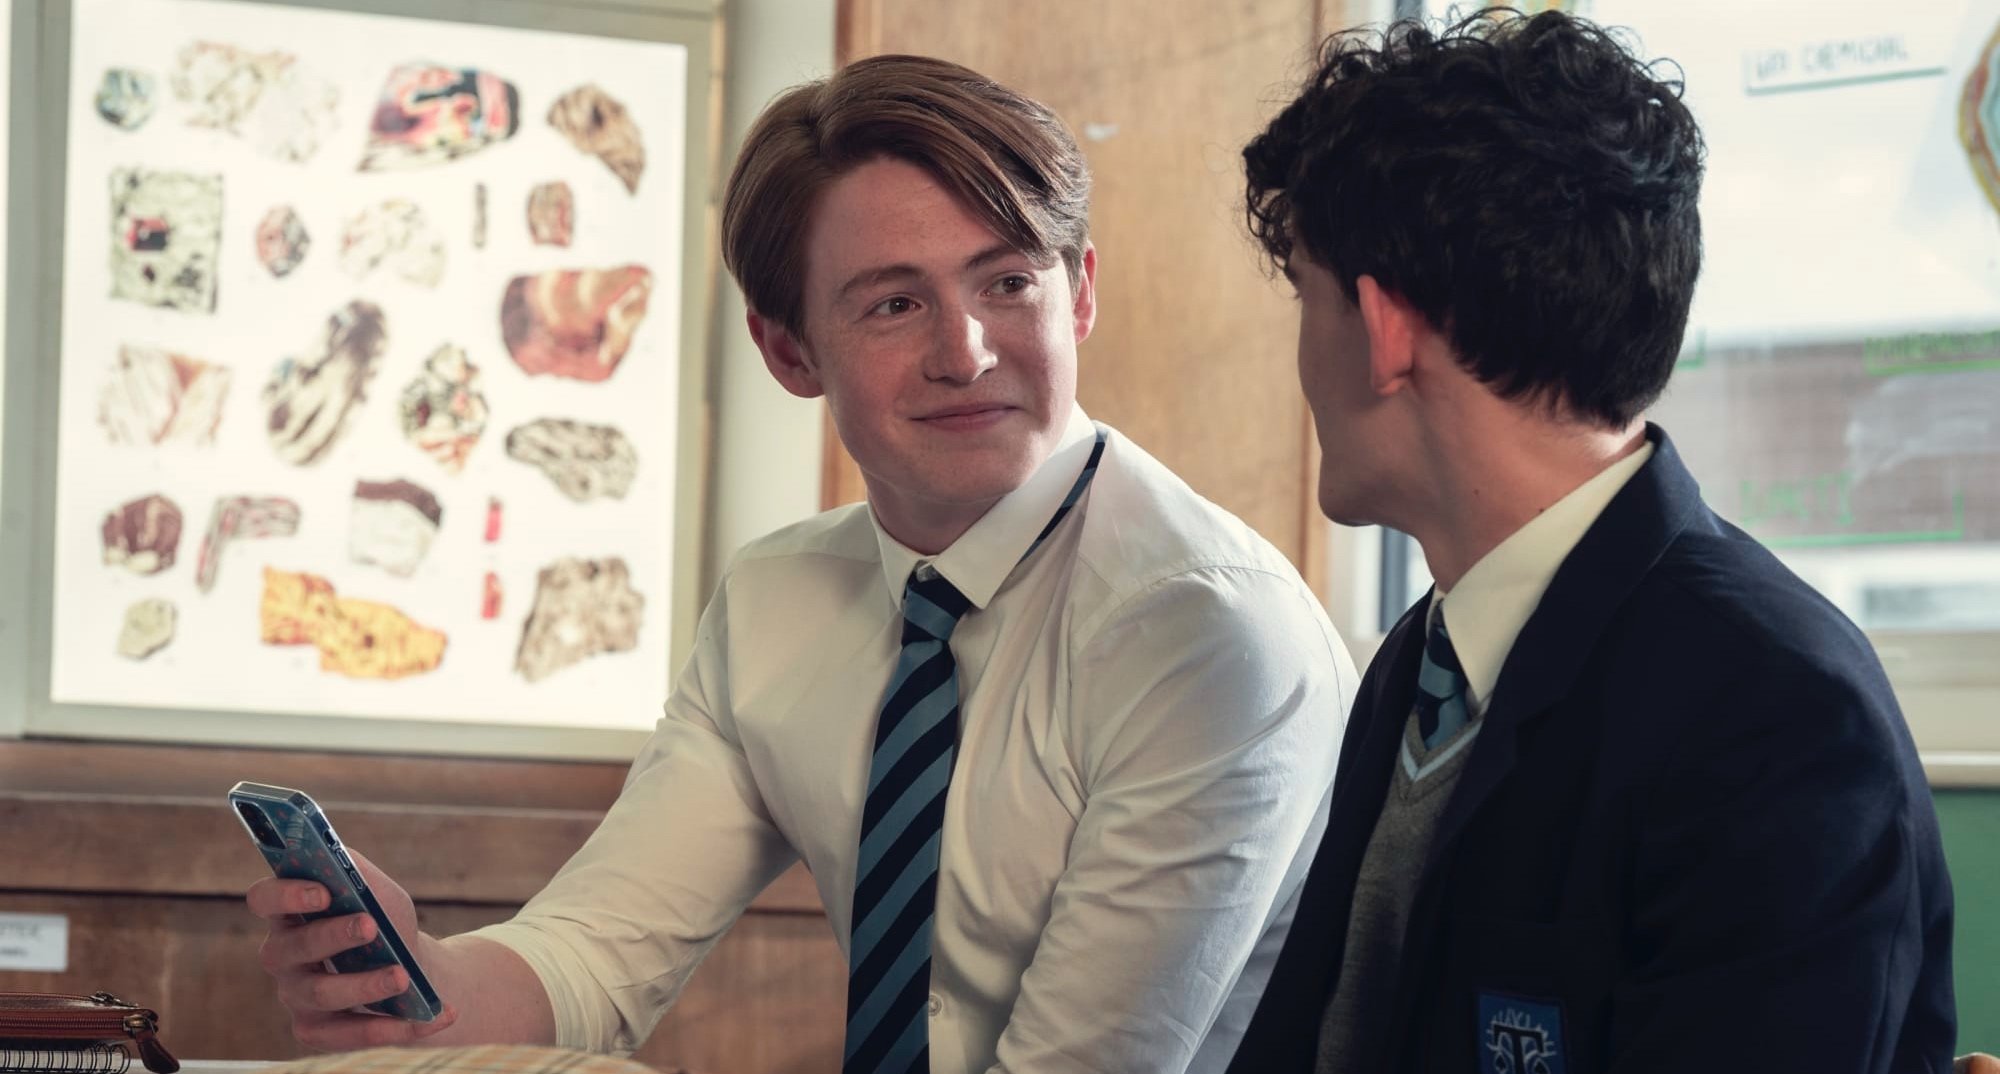 Nick Nelson from 'Heartstopper' series wearing school uniform staring at Charlie.